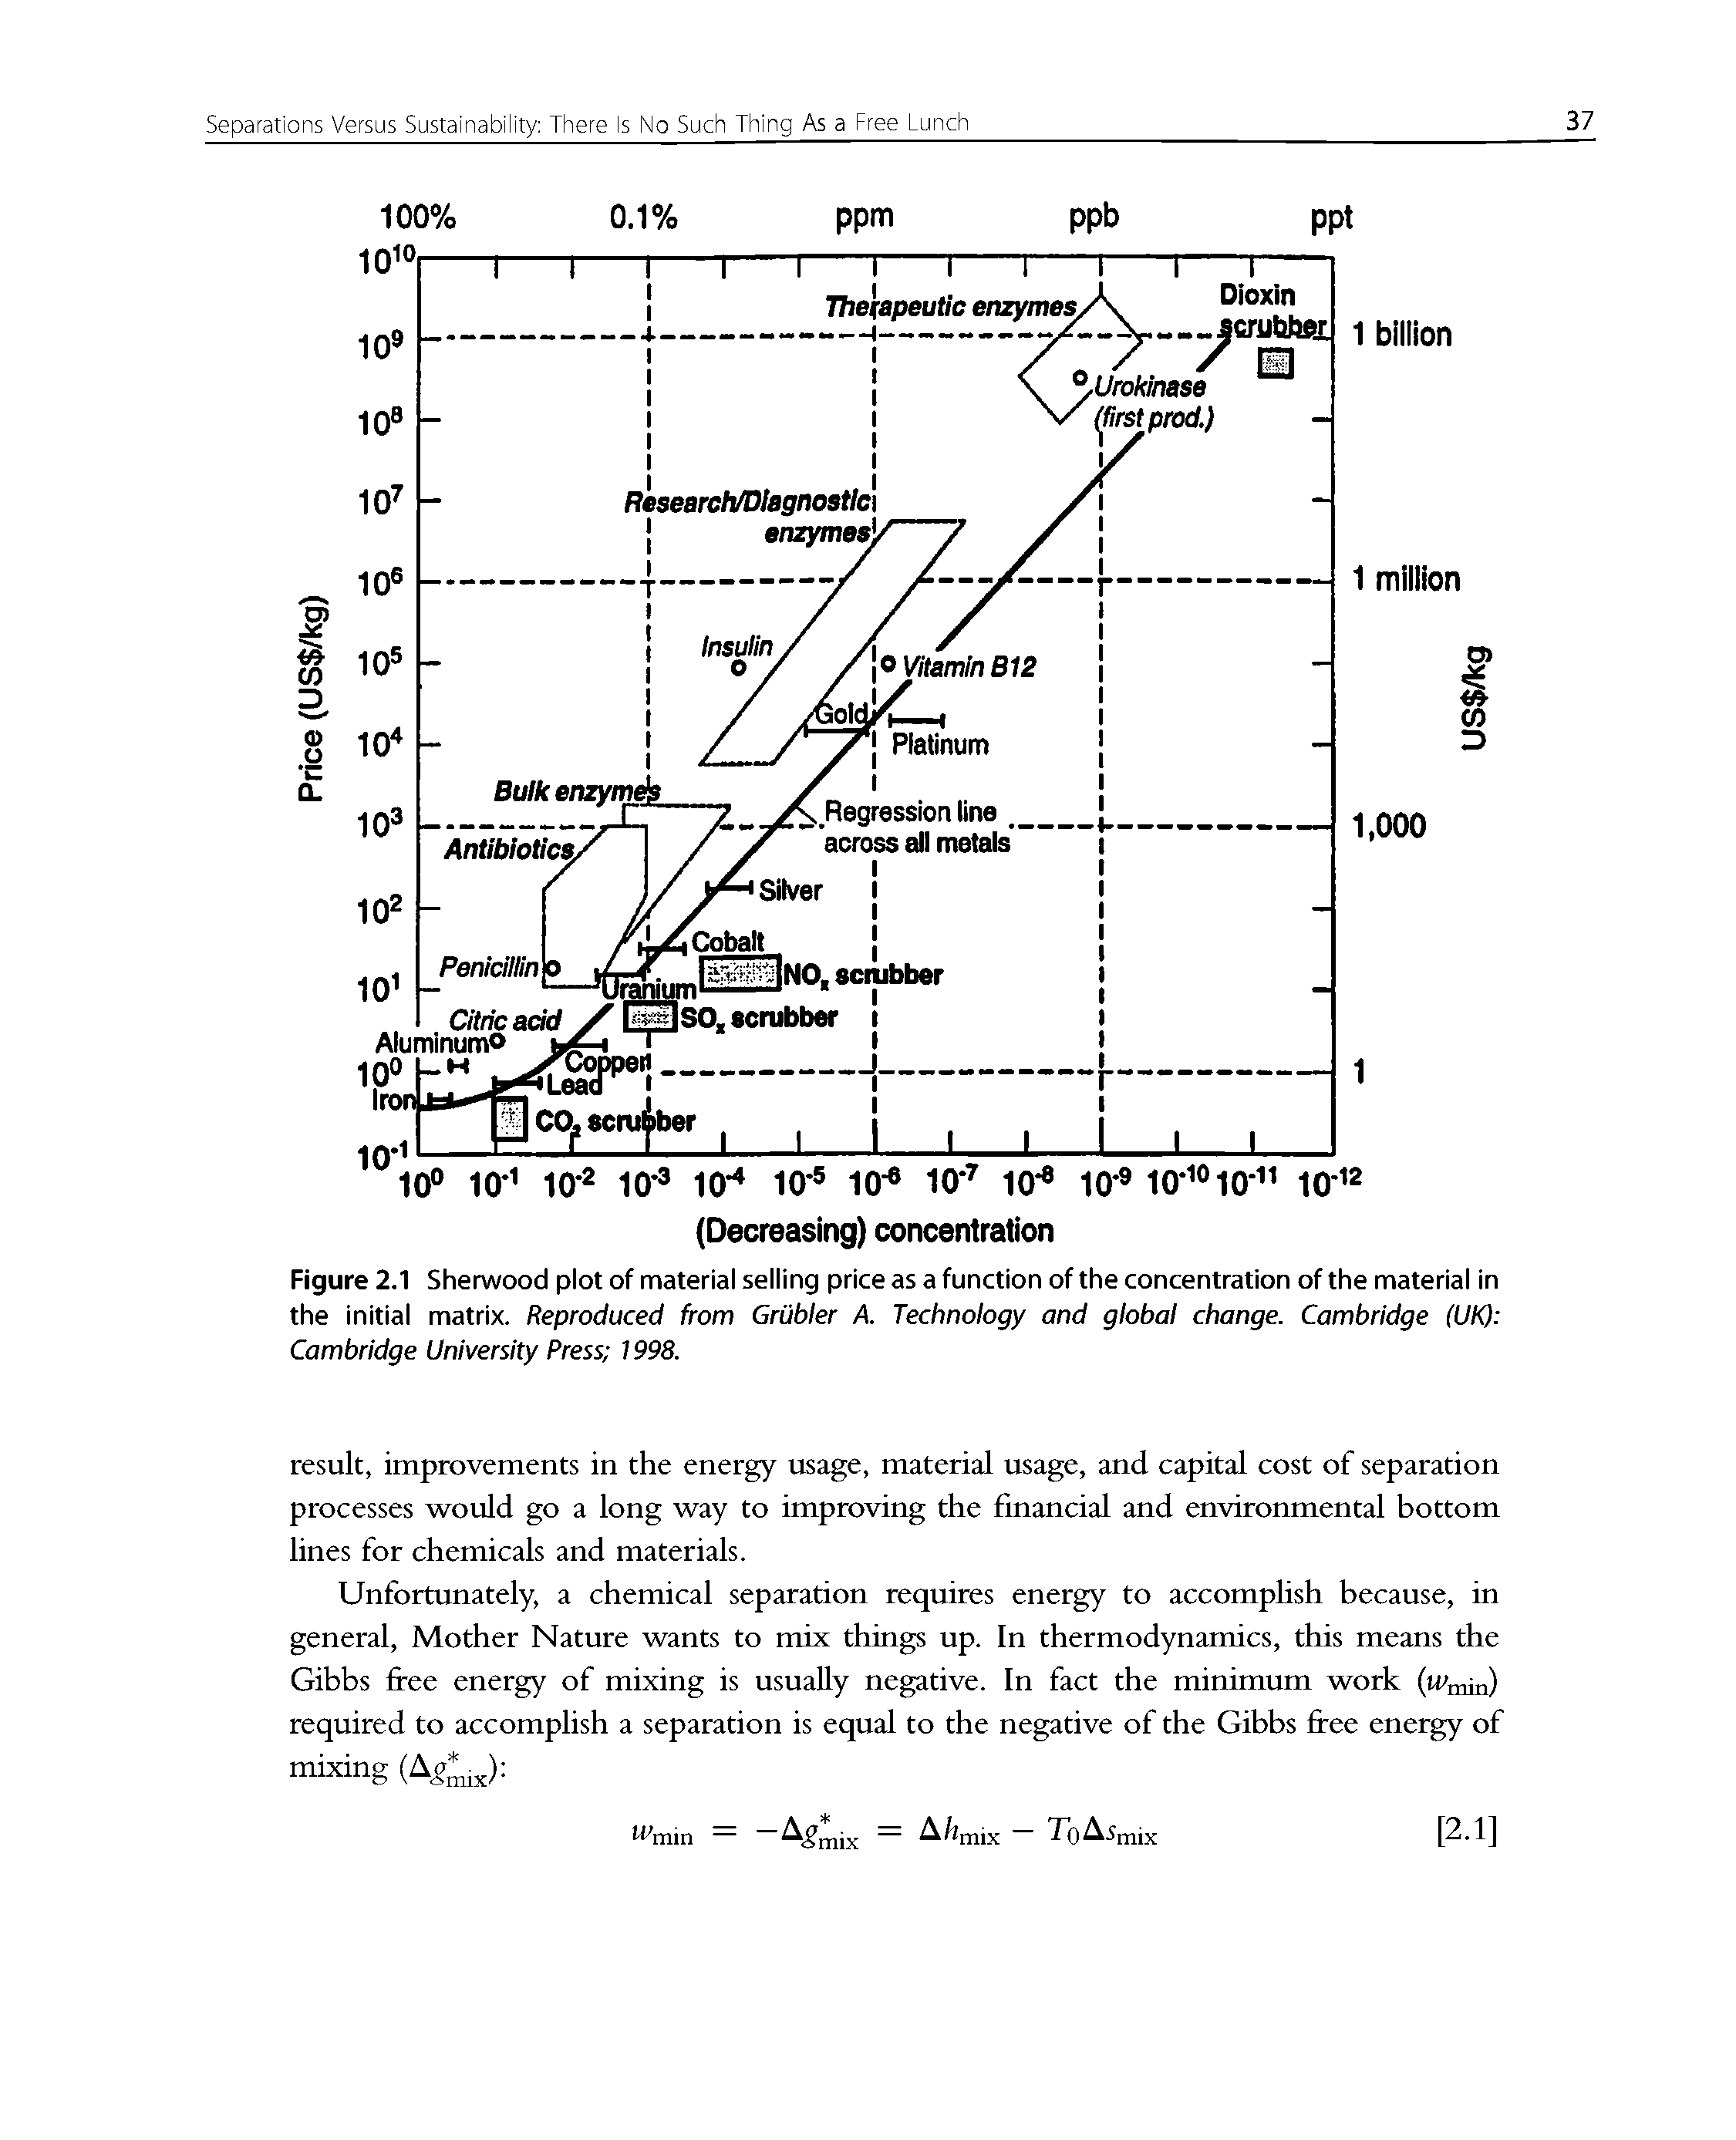 Figure 2.1 Sherwood plot of material selling price as a function of the concentration of the material in the initial matrix. Reproduced from Grubler A. Technology and global change. Cambridge (UK) Cambridge University Press 1998.